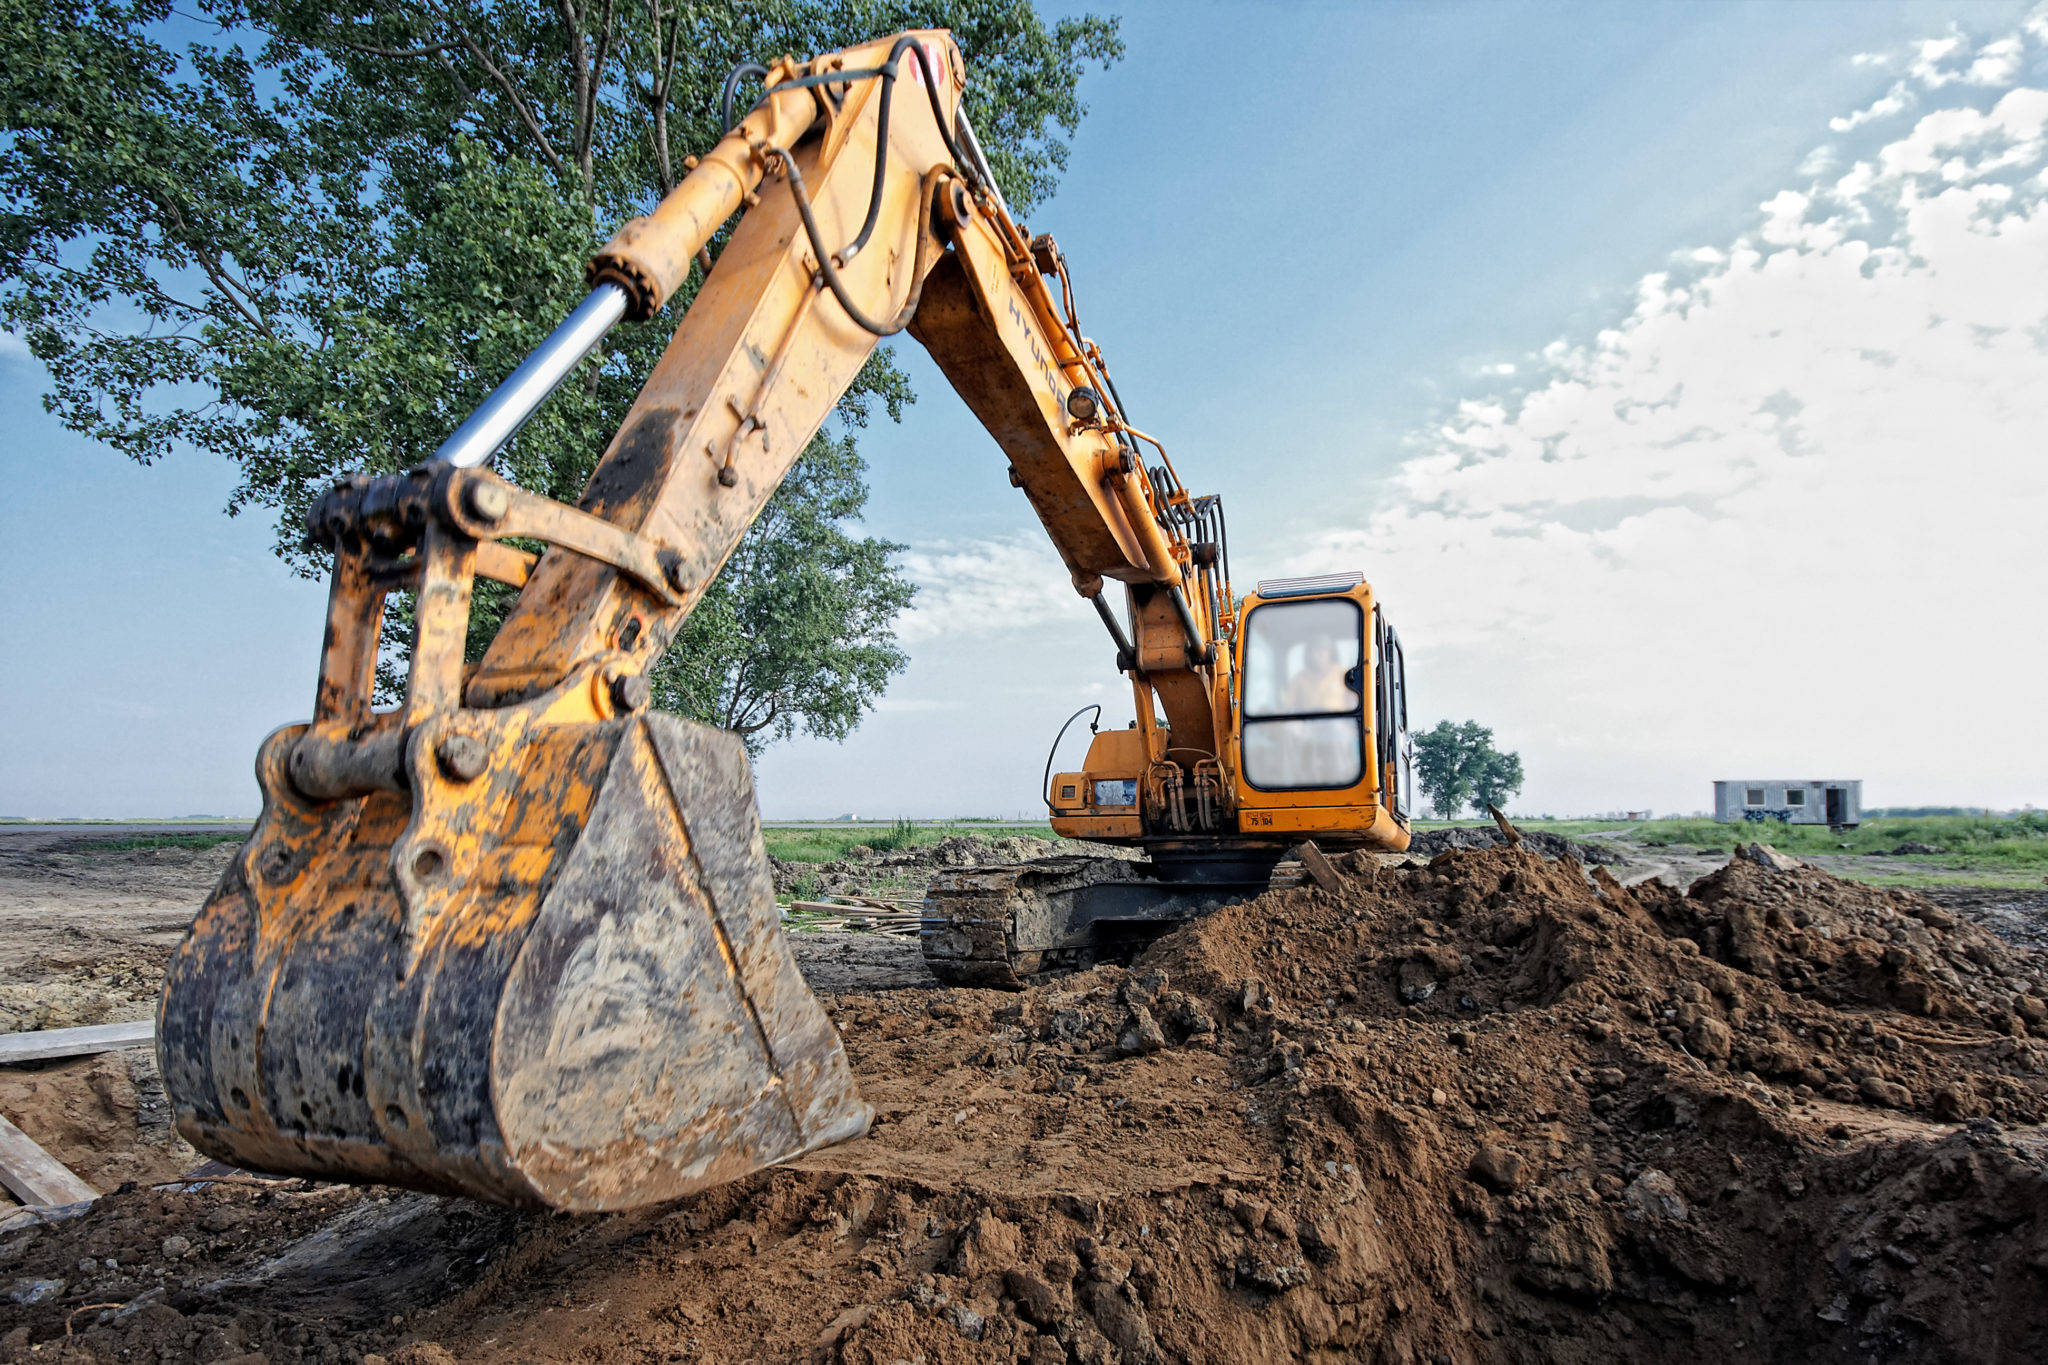 A photo of an excavator digging a trench for a pipeline.